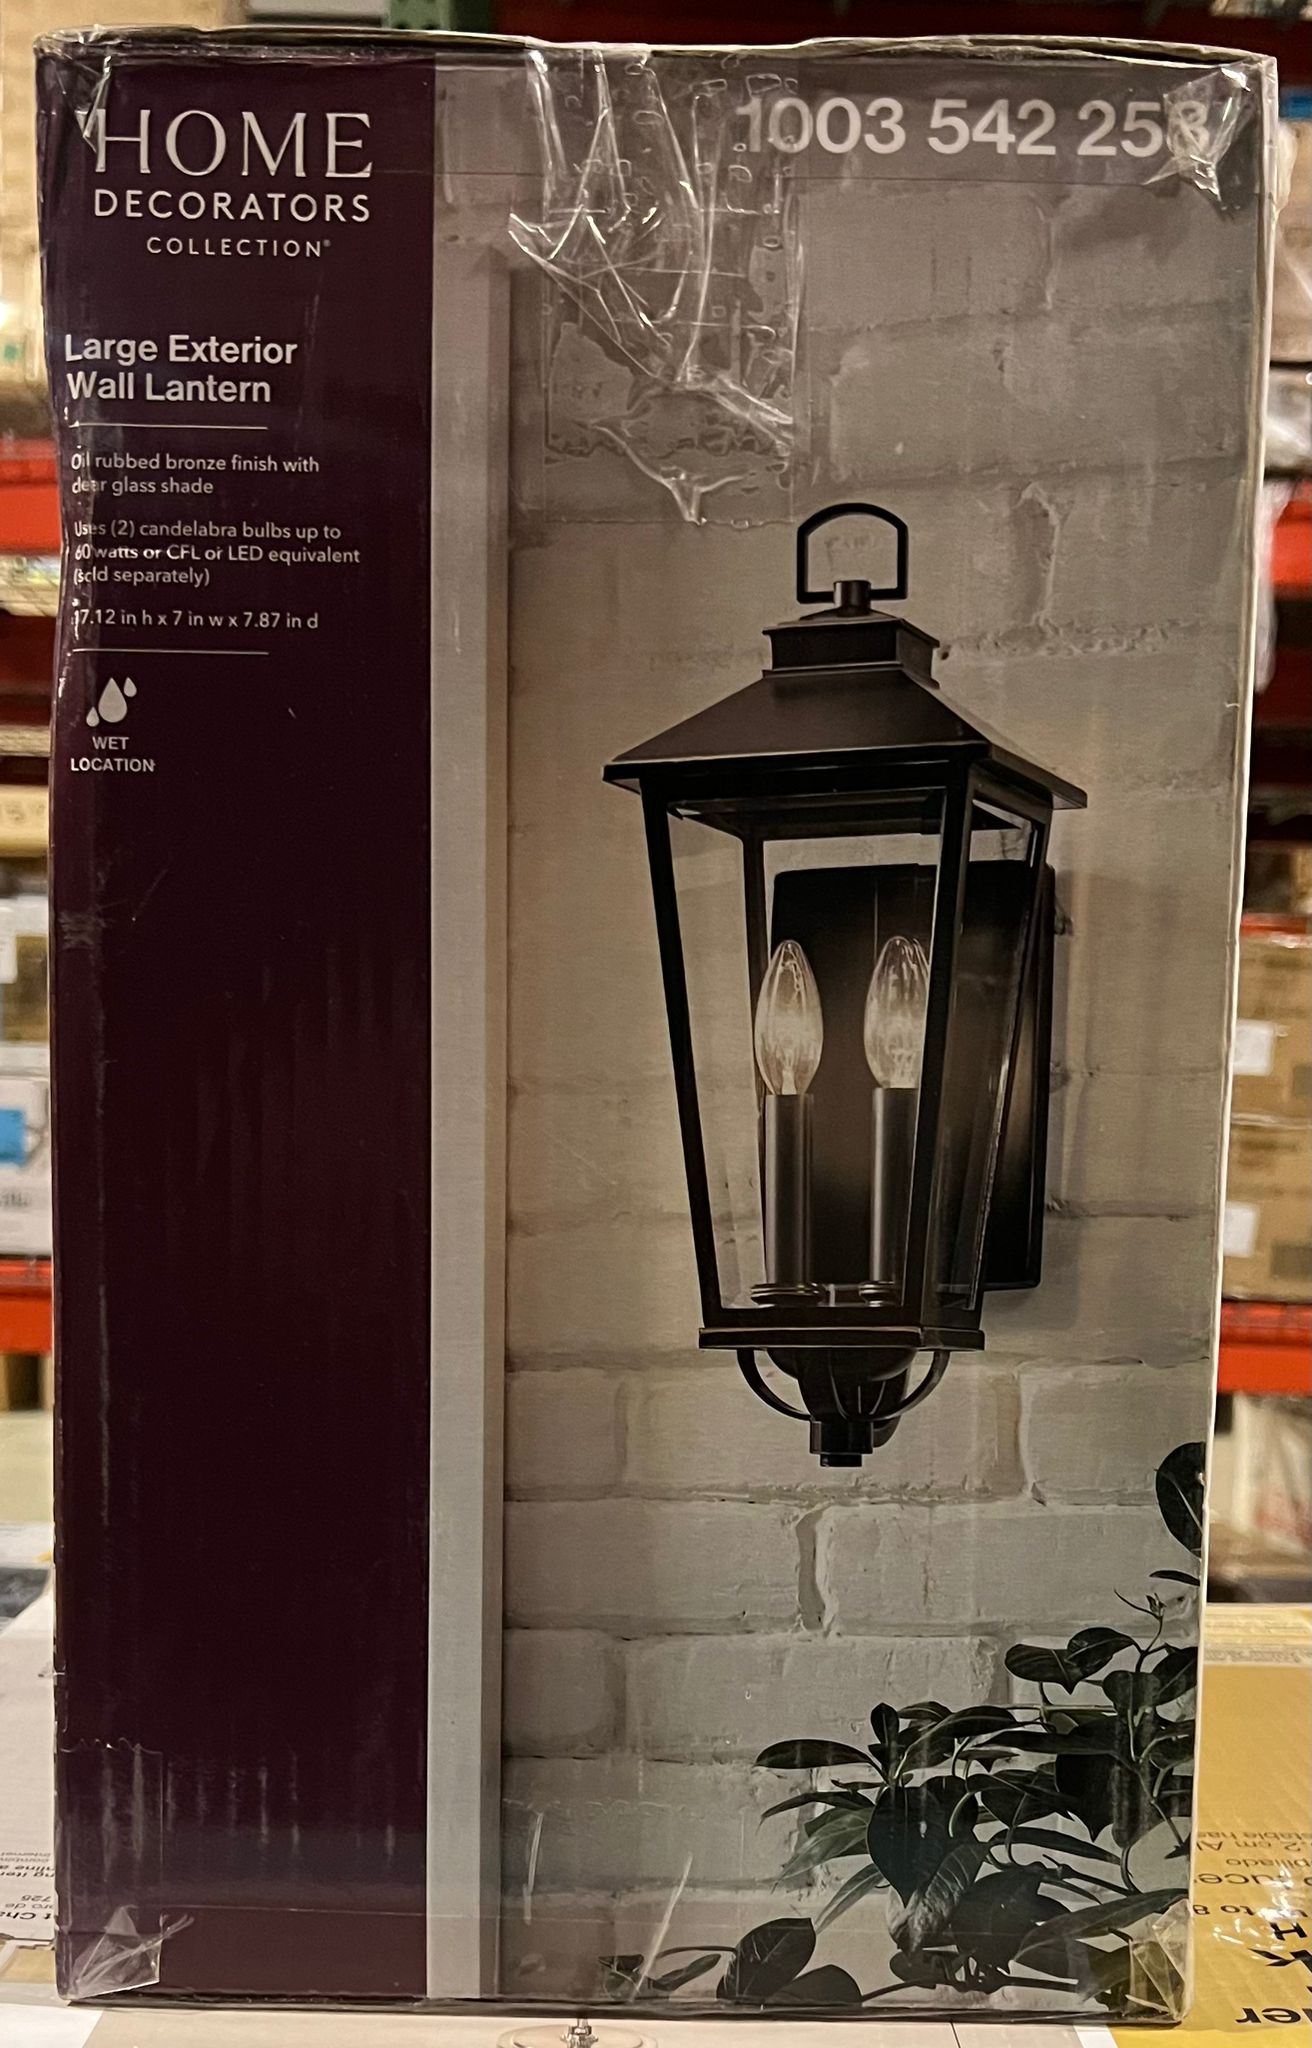 Williamsburg 17.12 in. Gas Style 2-Light Outdoor Wall Mount Coach Light Sconce - $55